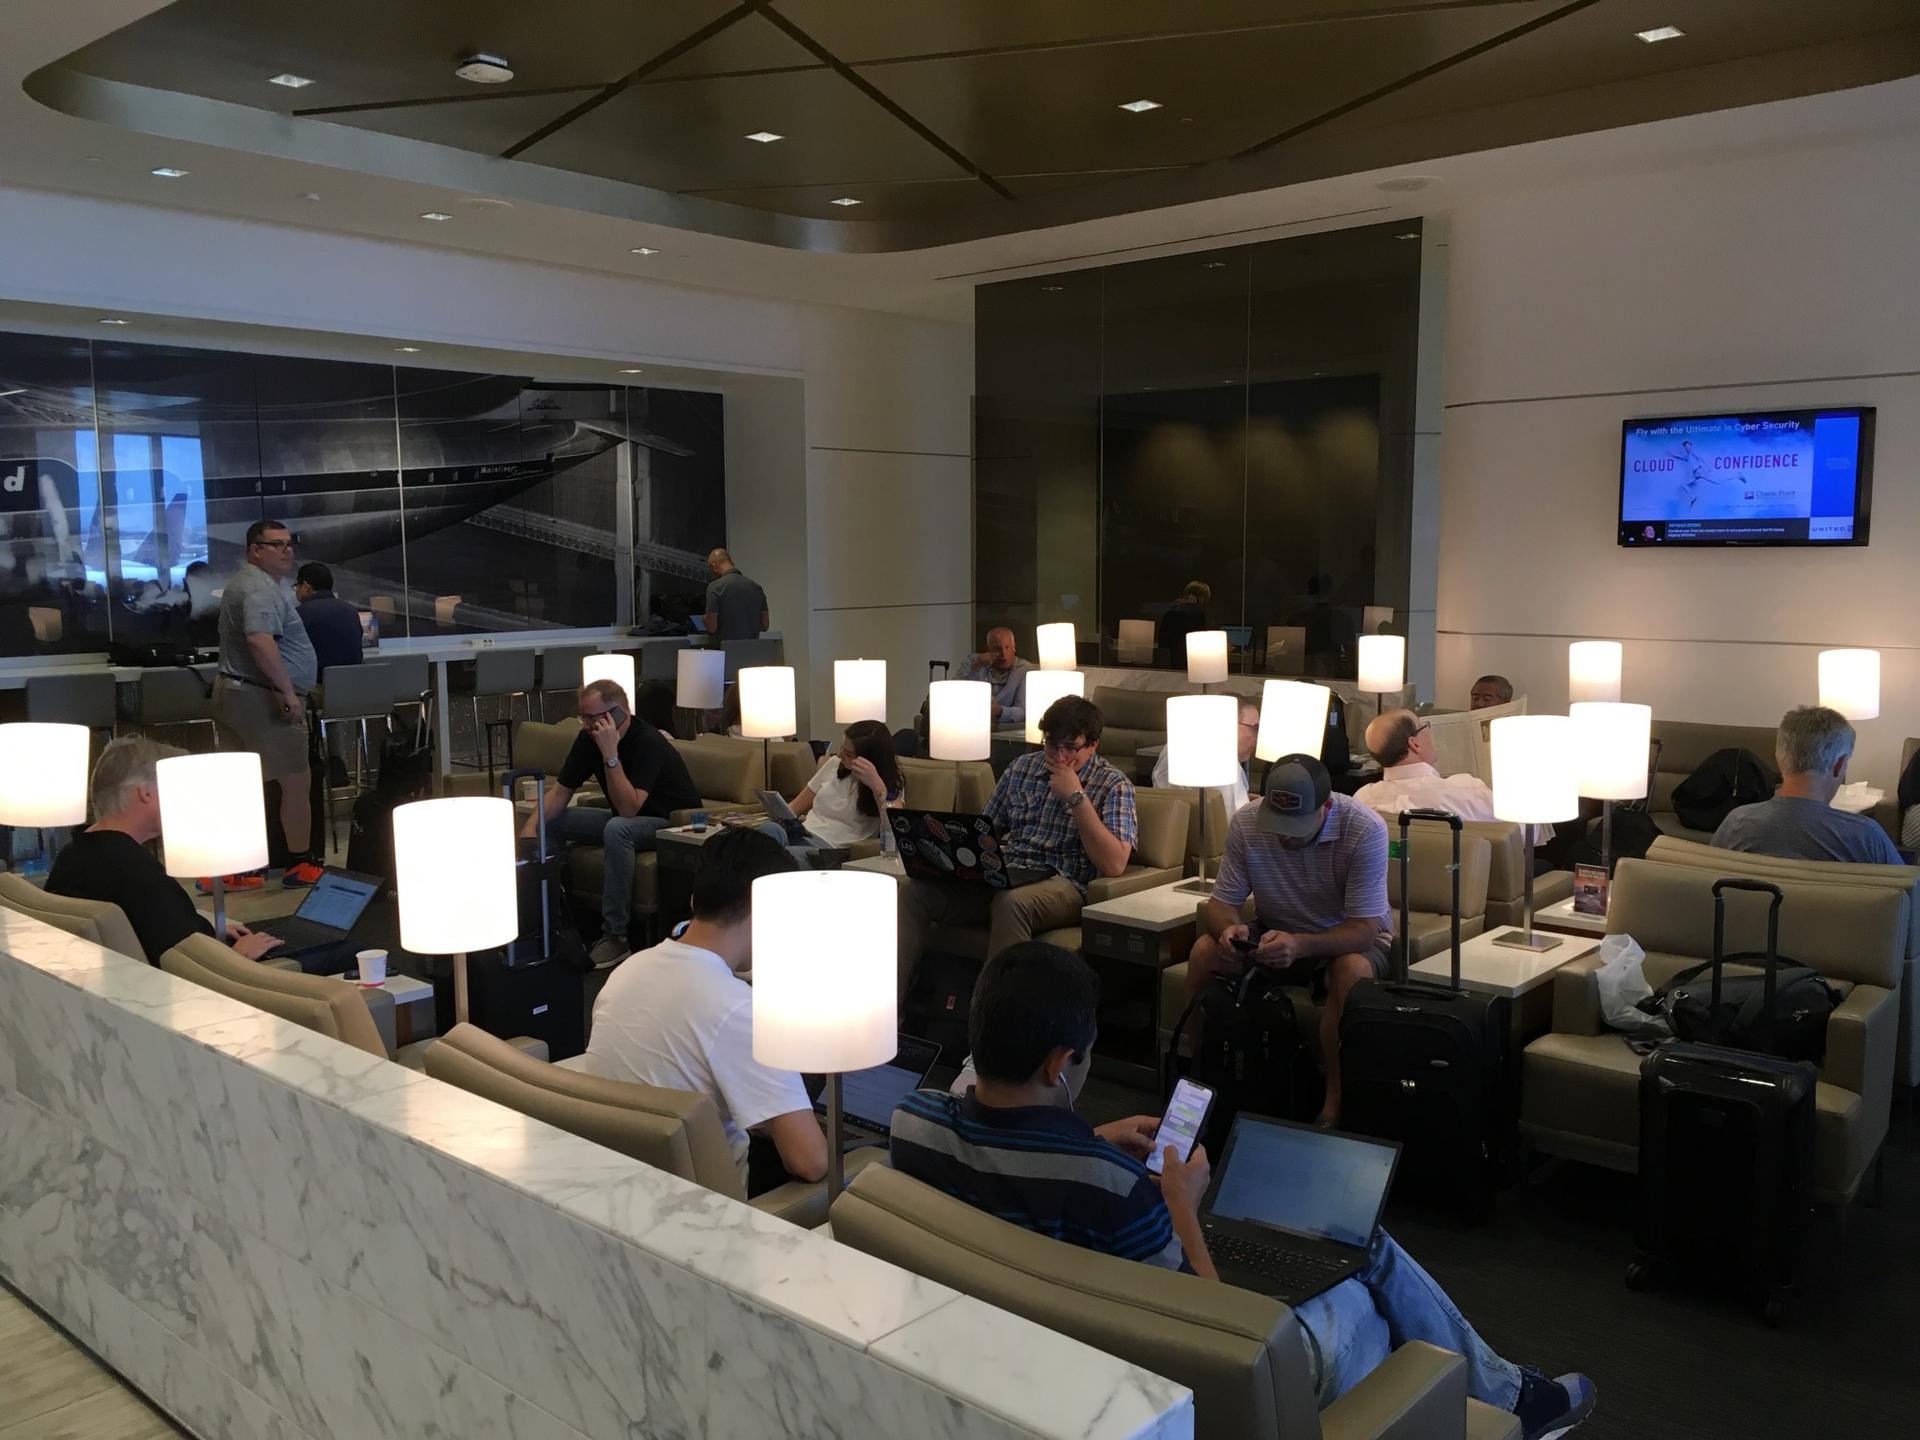 Review: The Club LAS (Las Vegas Terminal 3) - Live and Let's Fly